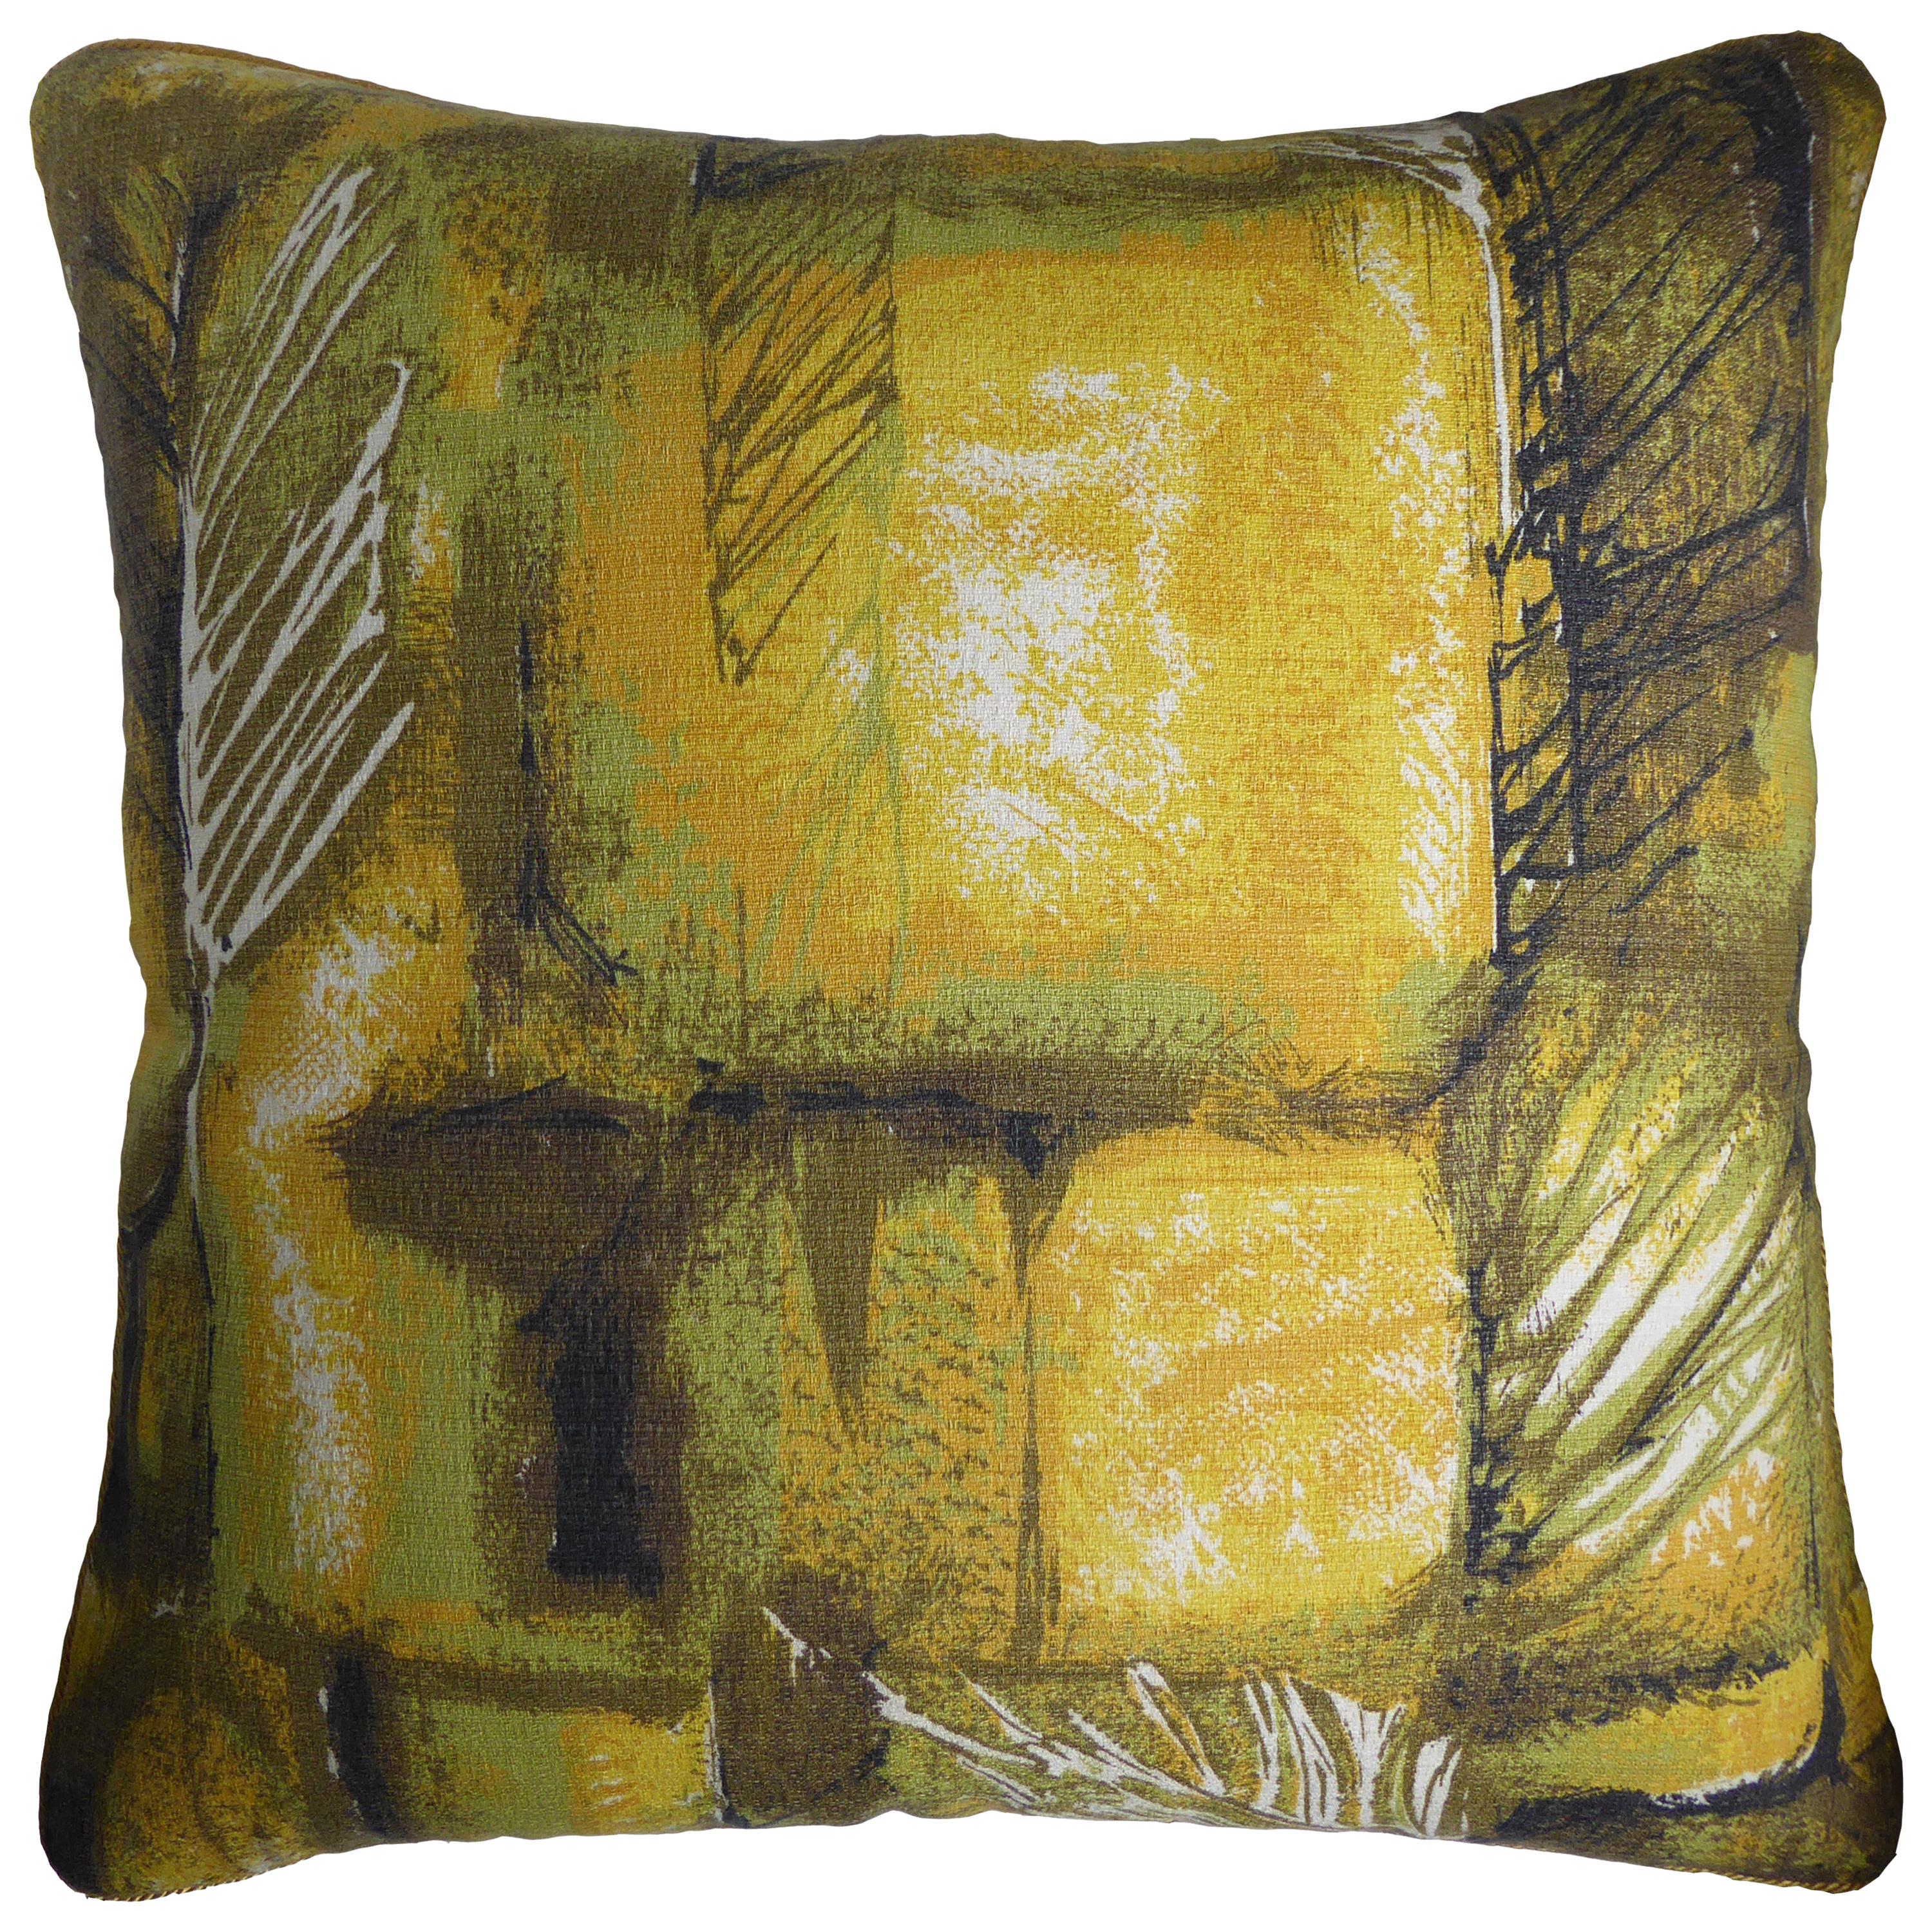 Vintage Cushions, Bespoke-Made Luxury Pillow, 'Feather Leaf Vein', Made in UK